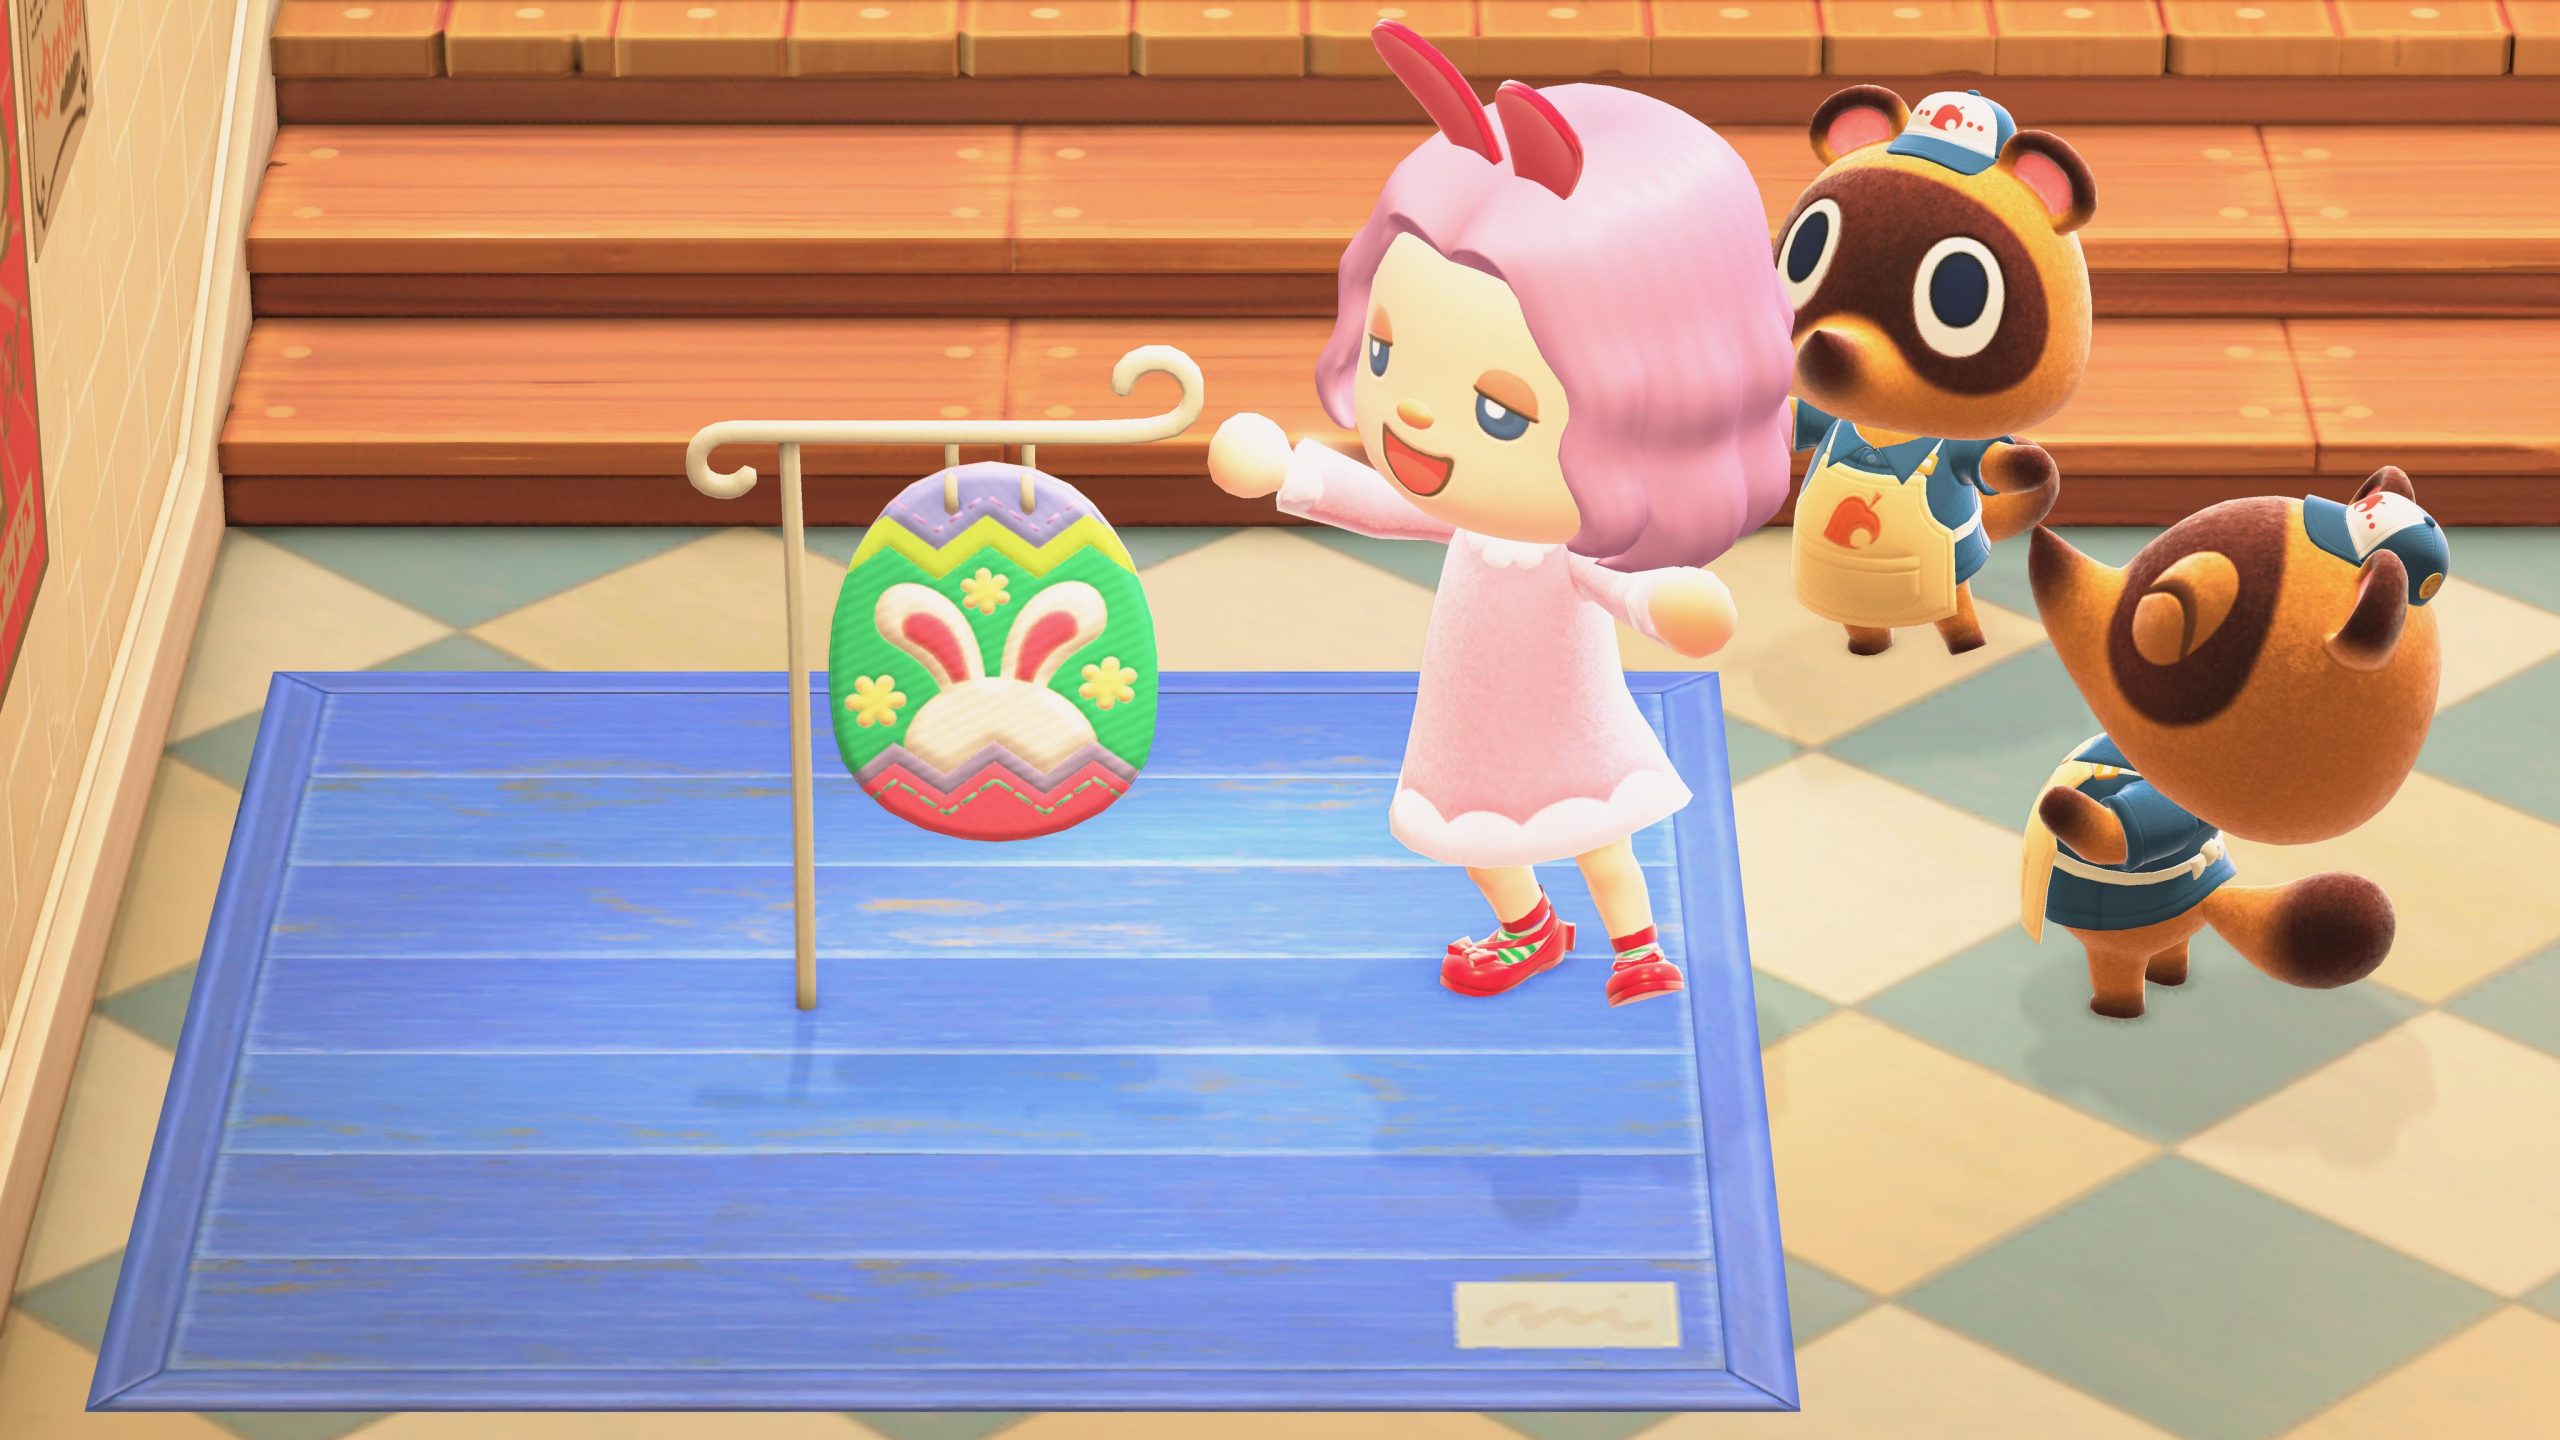 All New Items In March Sanrio Update For Animal Crossing New Horizons